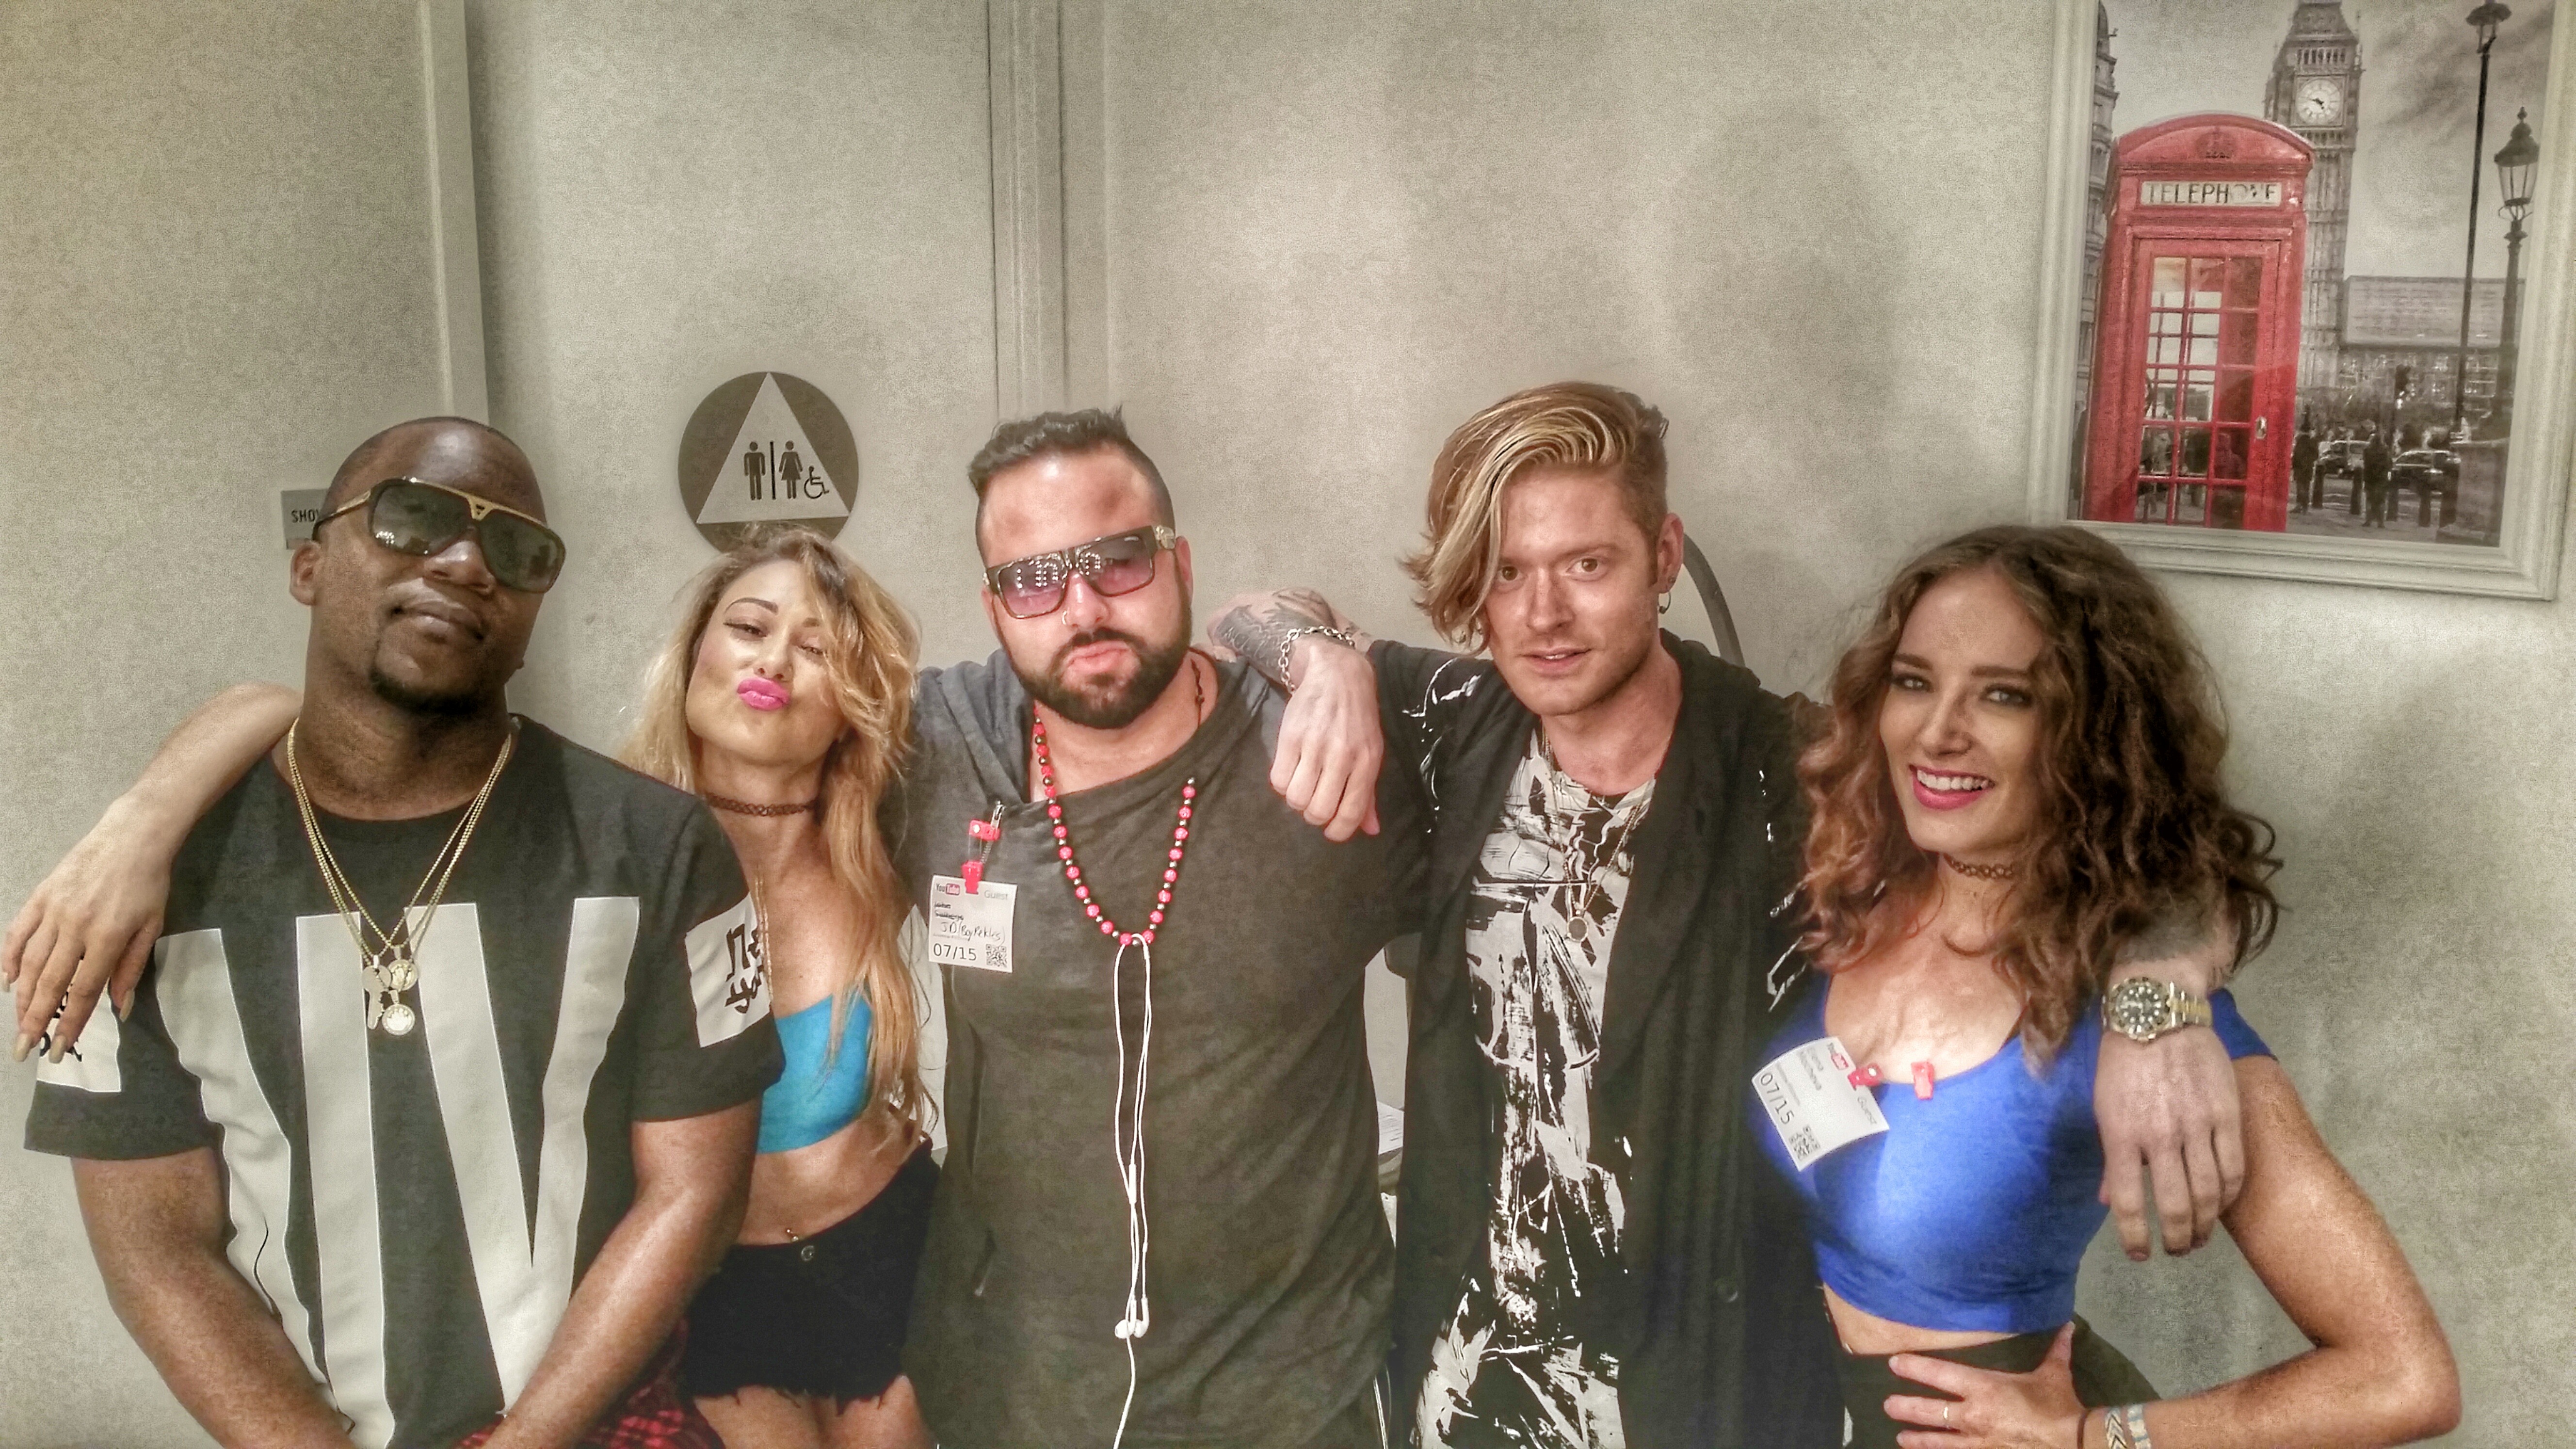 J.D. (Boy Rekless) Salbego and artists: Iyaz and Nash of Hot Chelle Rae on the set of Iyaz's music video 